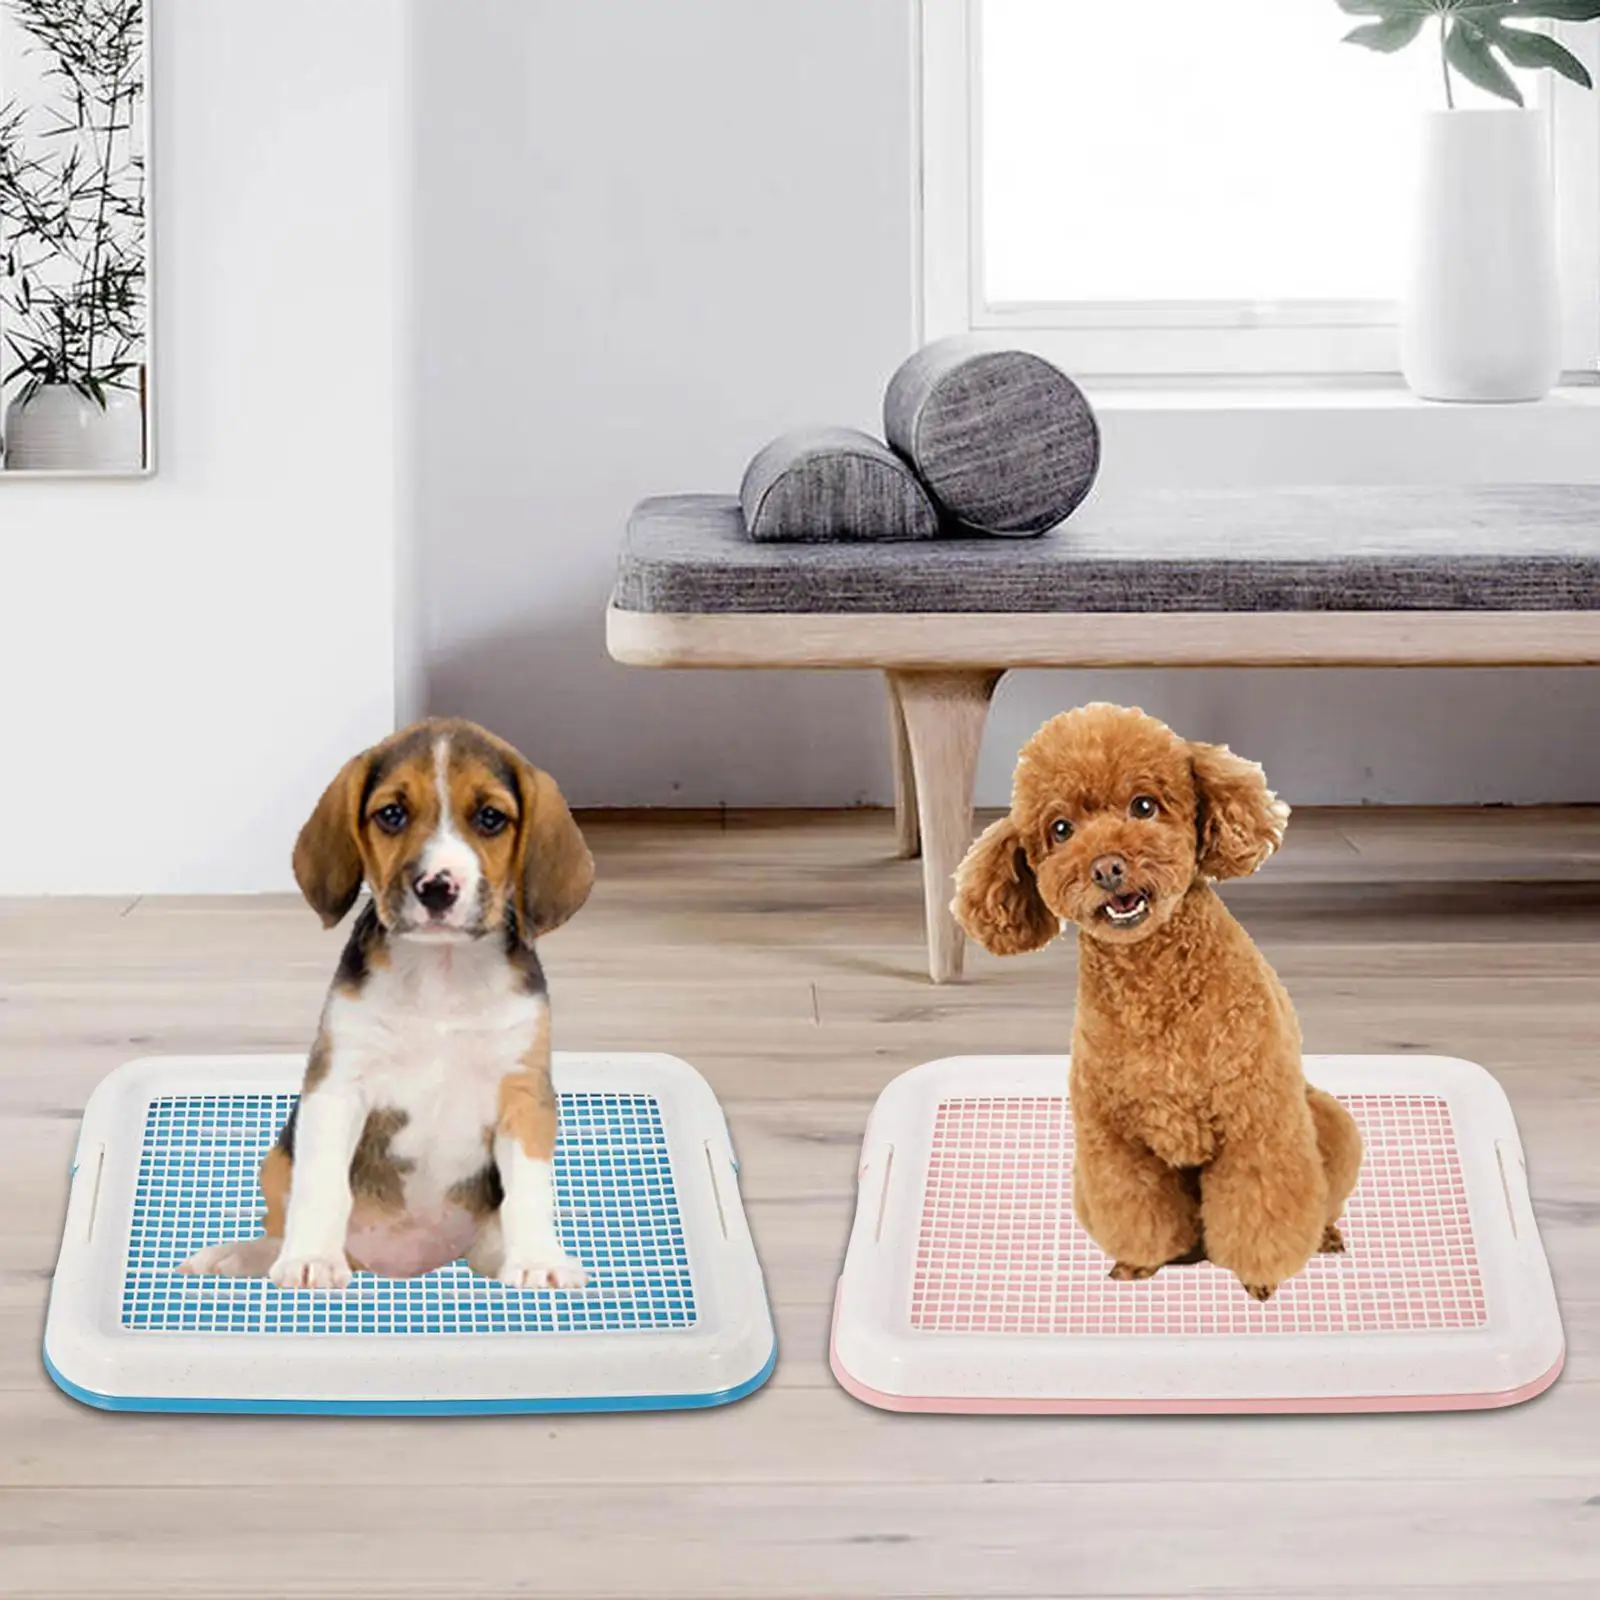 Dog Potty Toilet Training Tray Indoor Easy to Clean Puppy Pee Pad Holder Mesh Potty Training Tray for Puppies Small Size Dogs